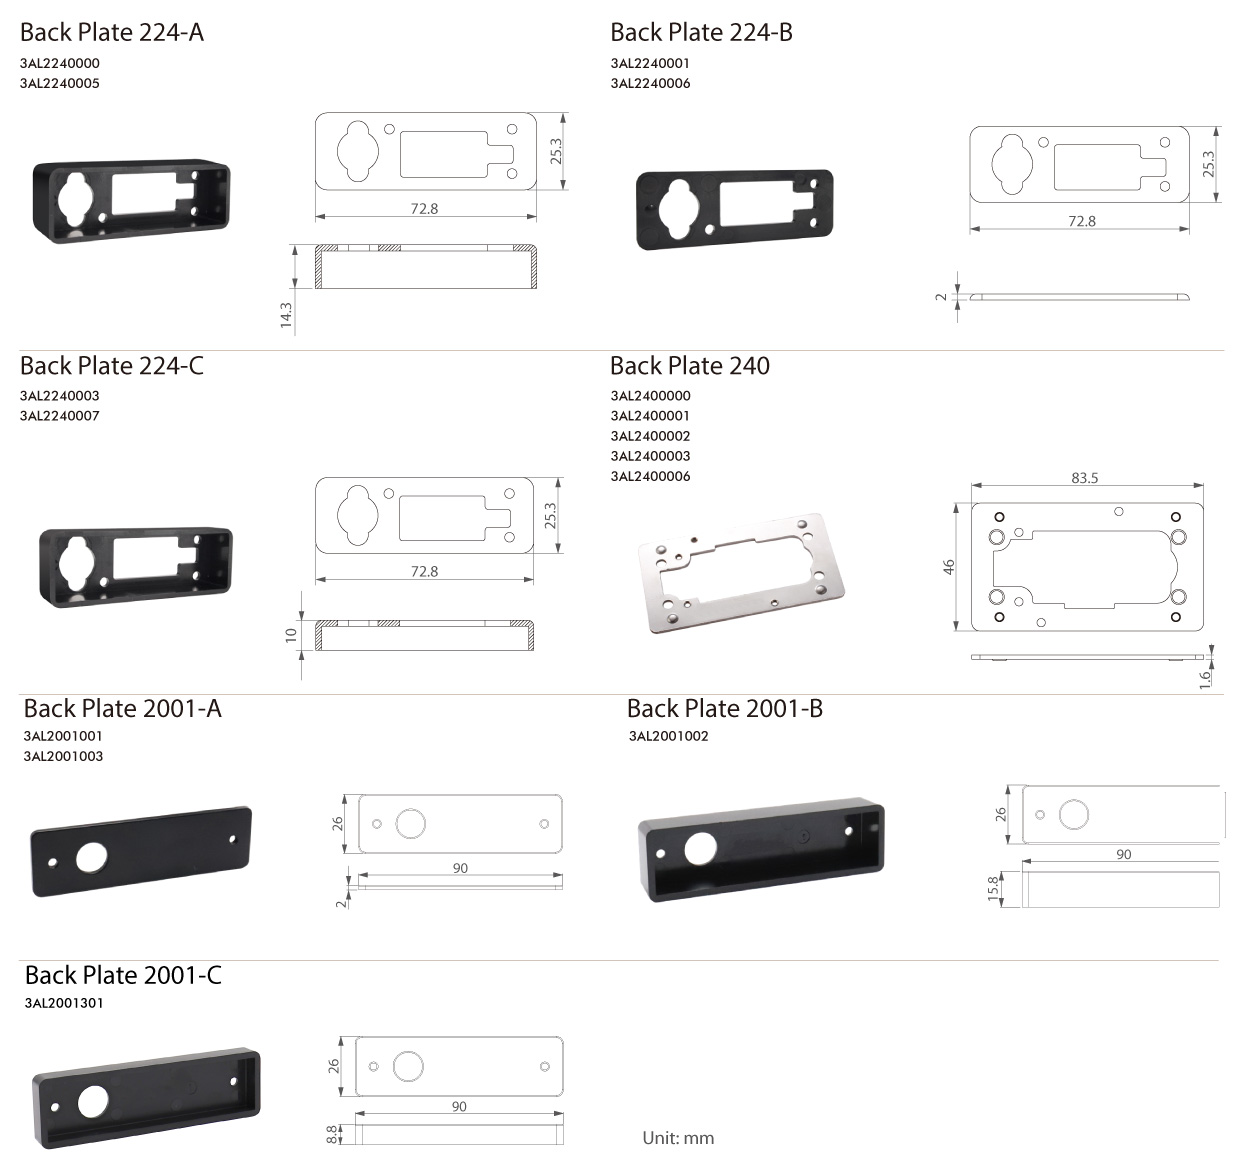 Series 2XX Backplates for Cabinet Locks